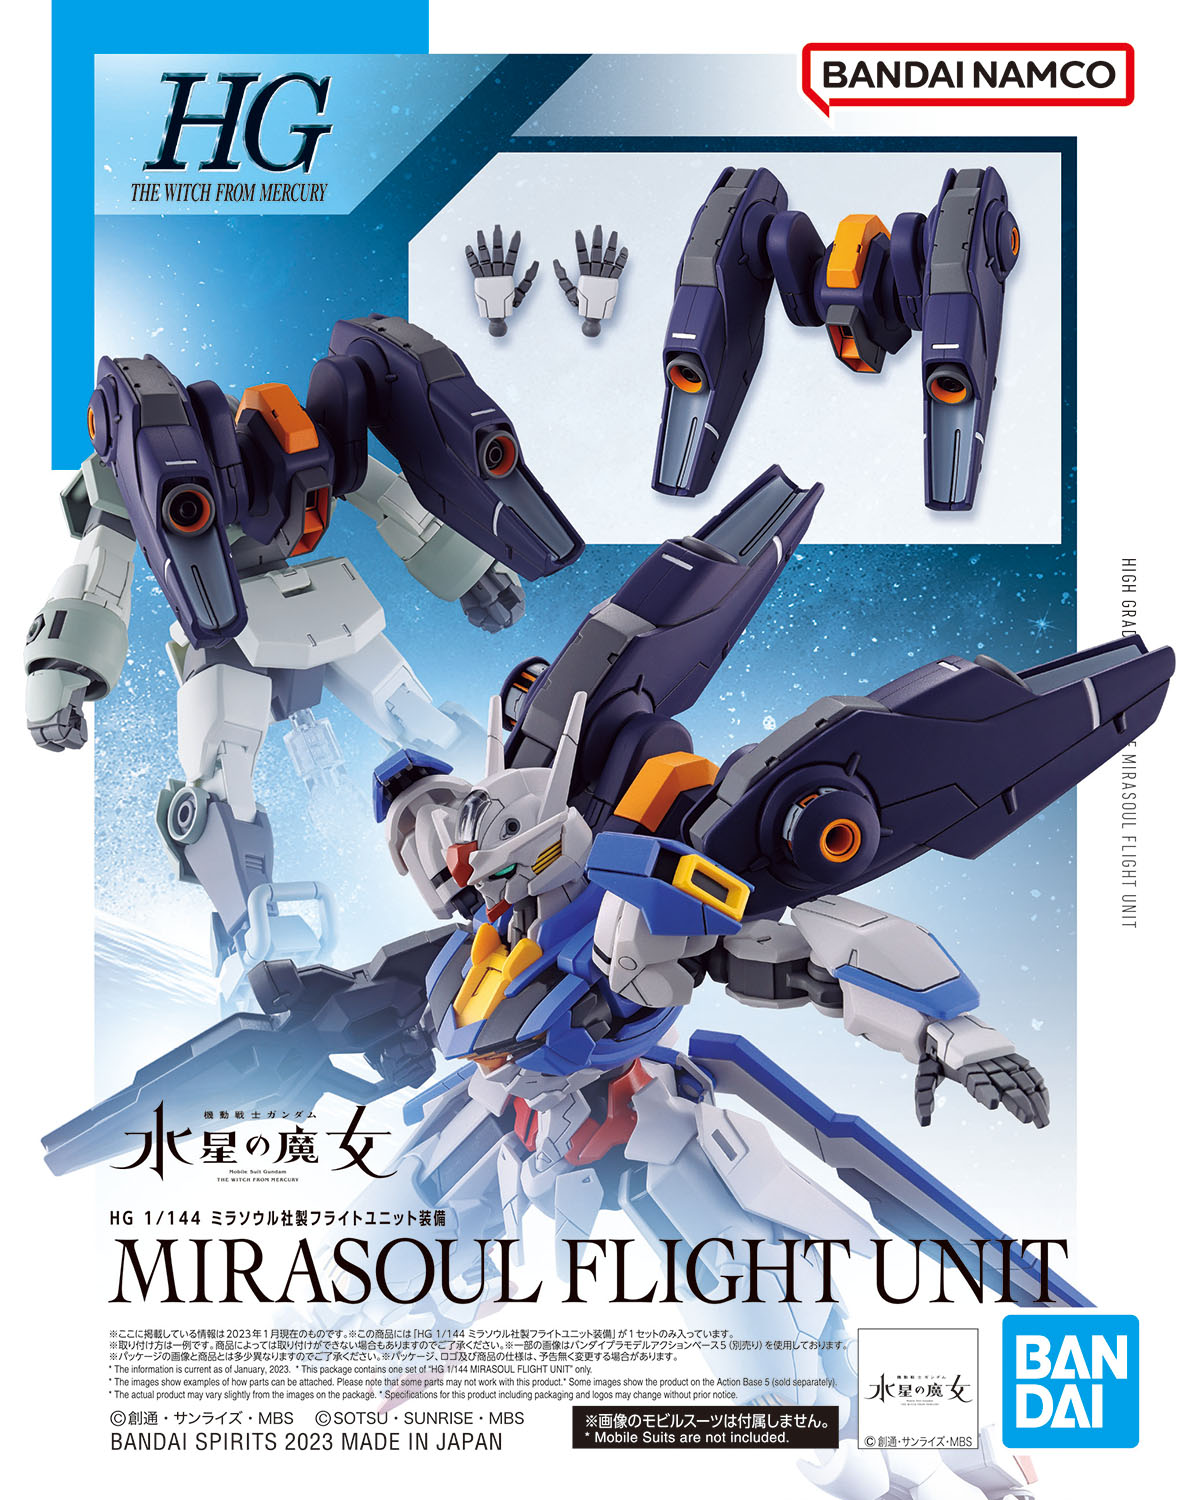 Sure, the HG Gundam Aerial is great, but I personally care about